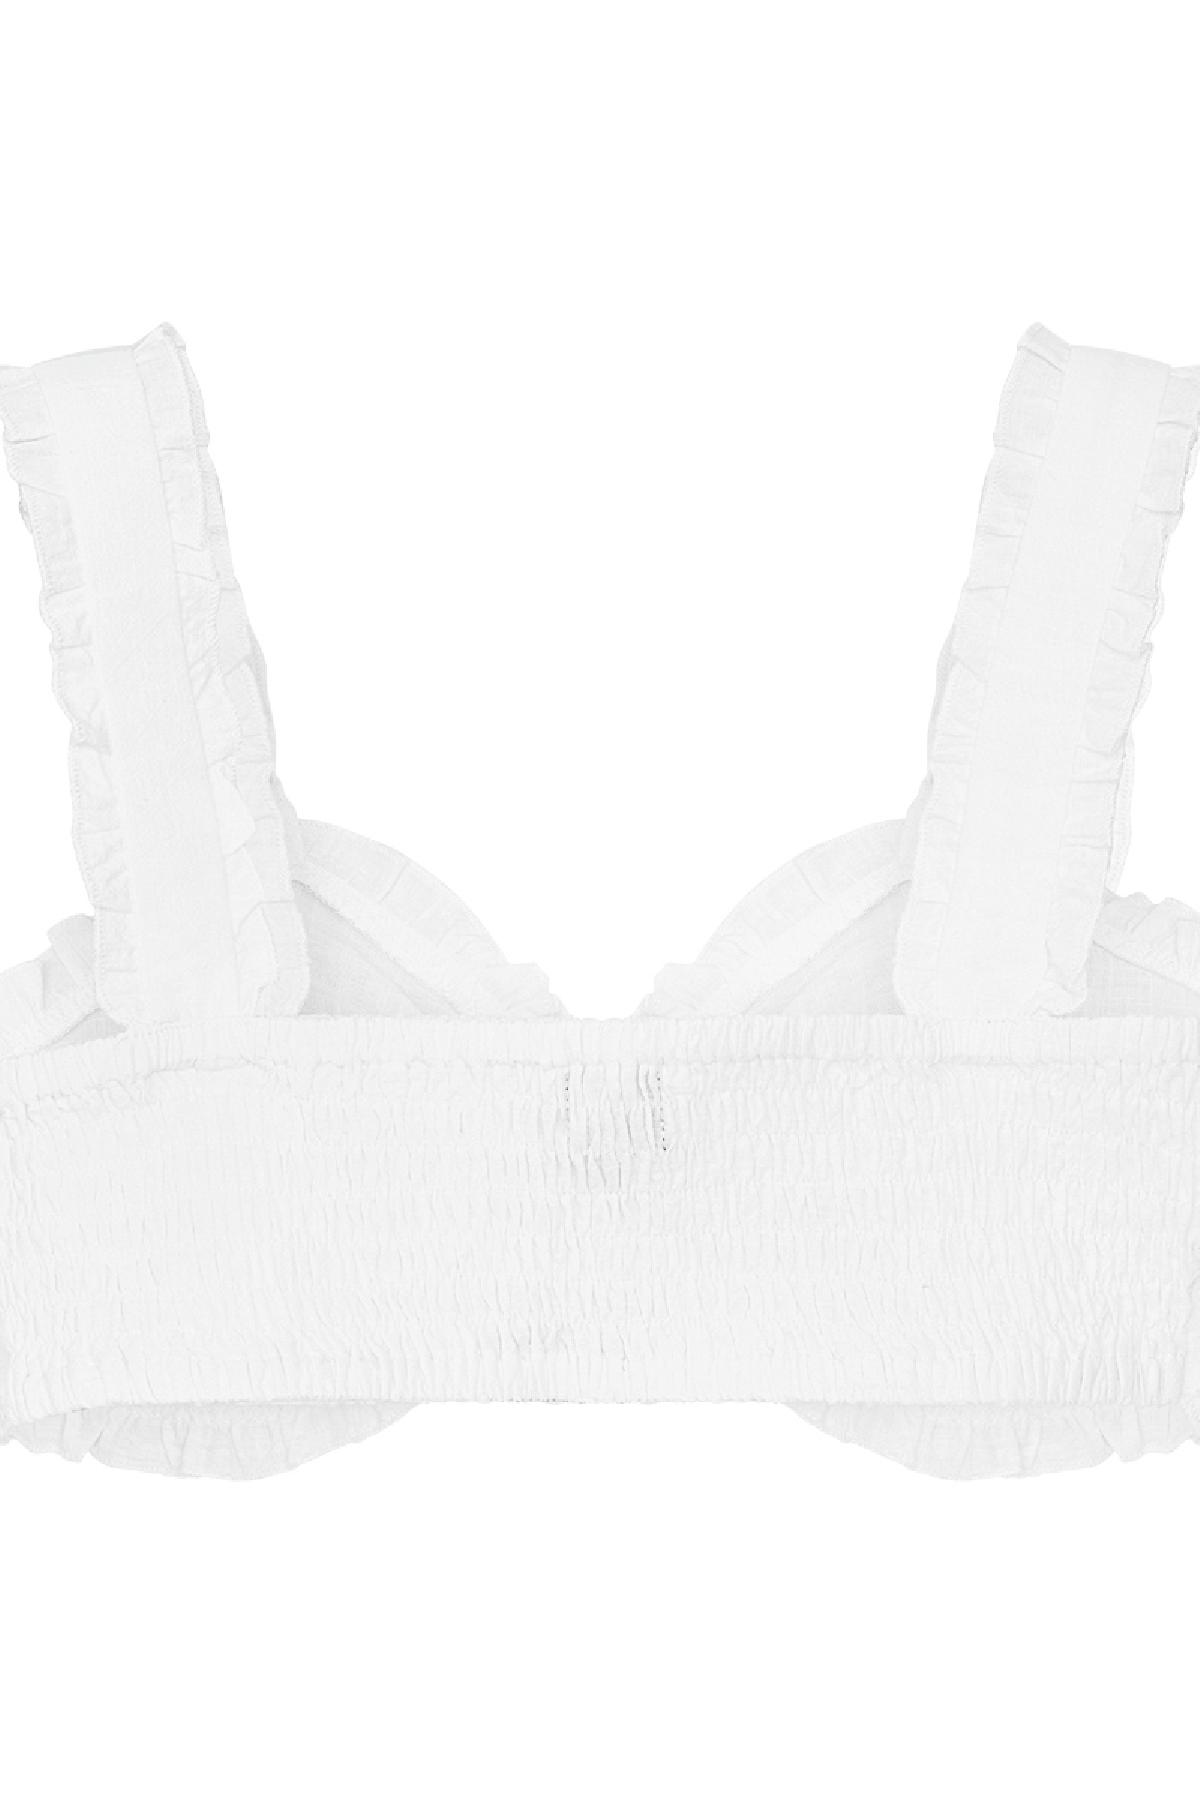 Crop top cut out - white L h5 Picture6